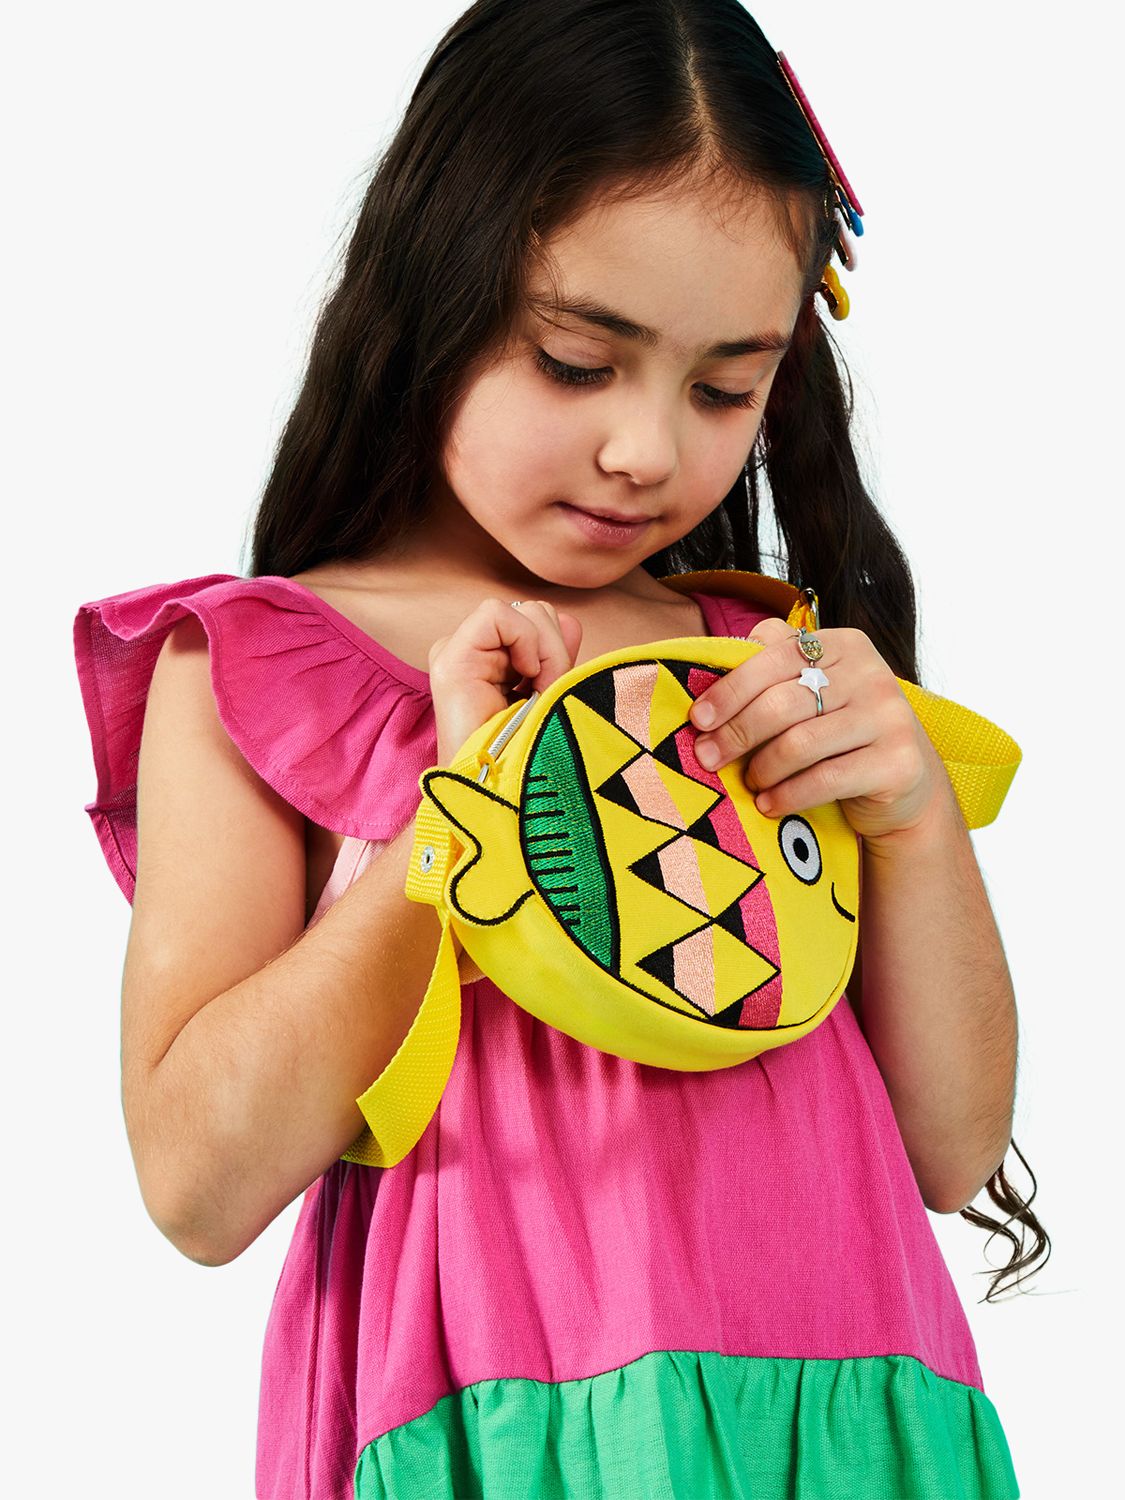 Angels by Accessorize Kids' Fun Fish Shape Bag, Yellow/Multi, One Size